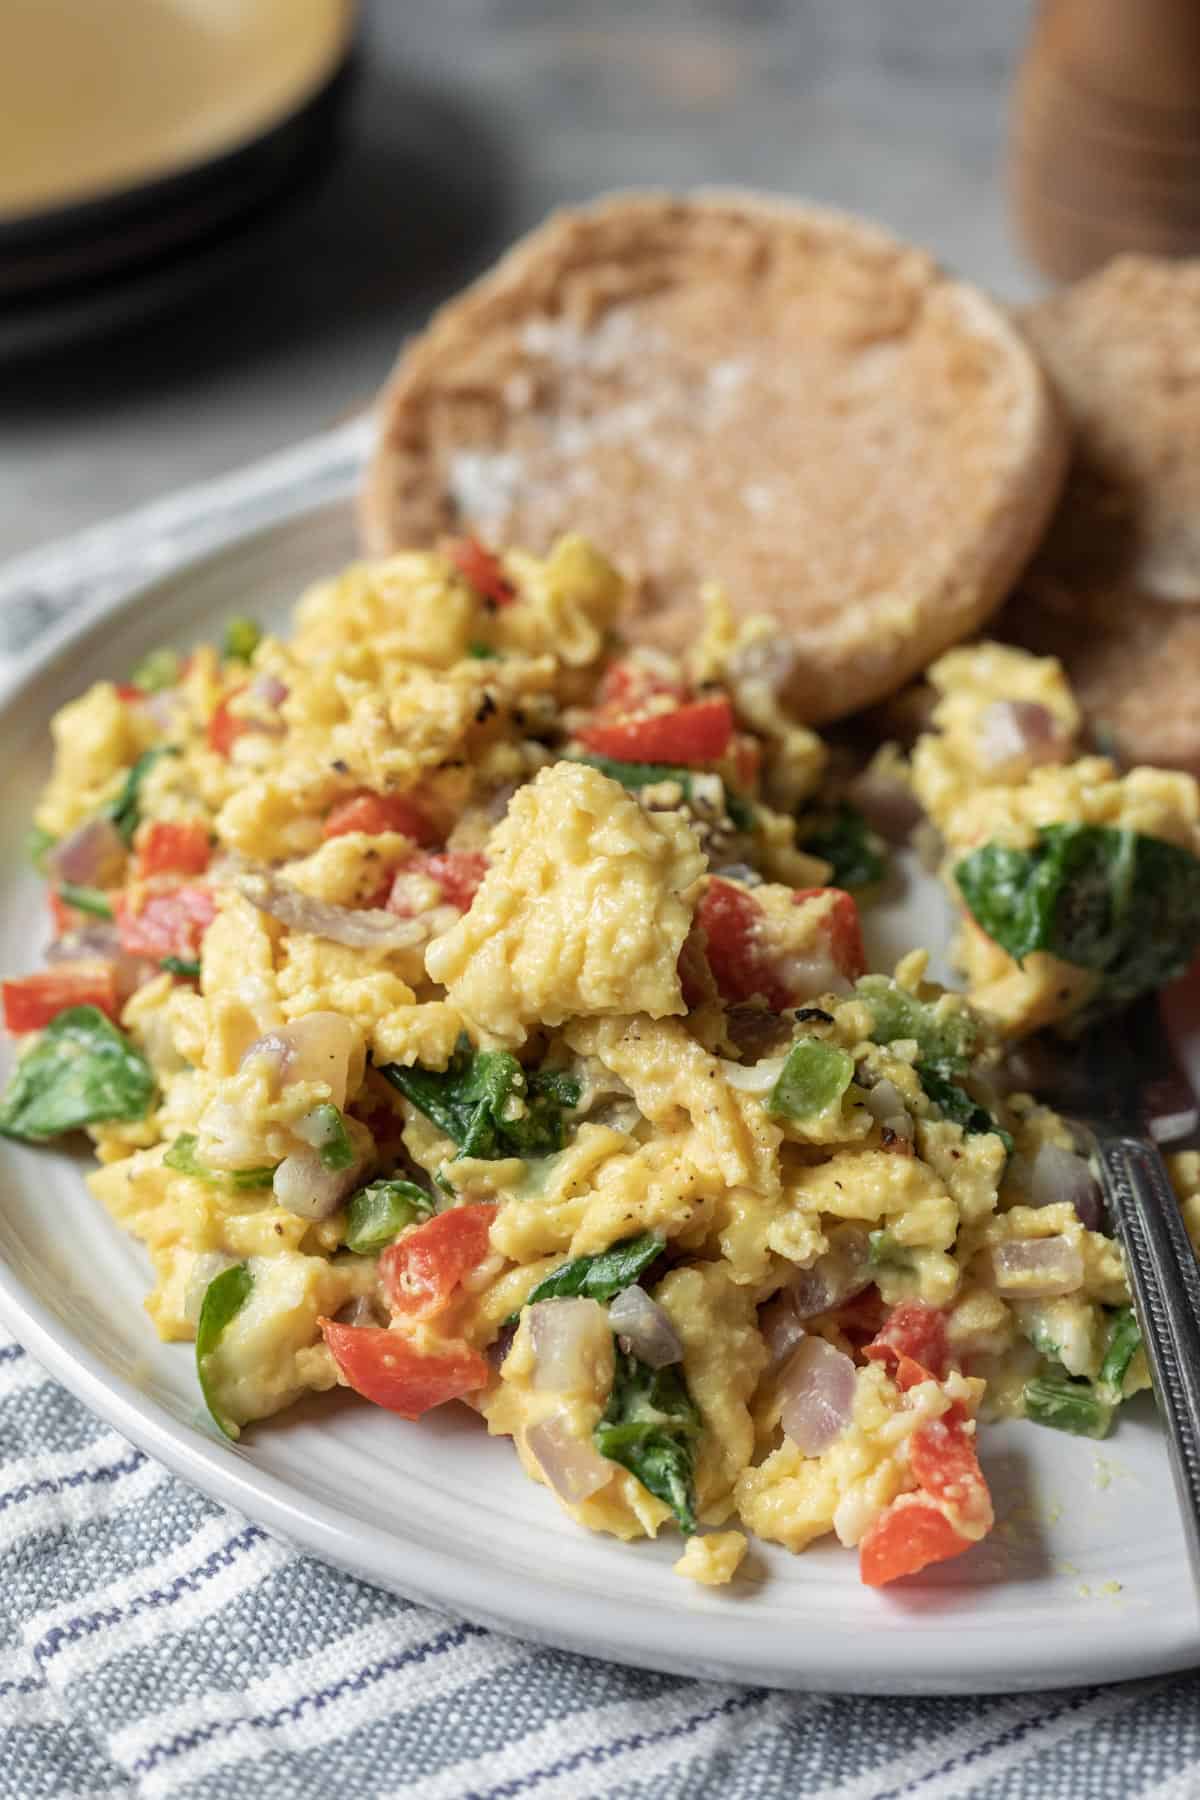 Veggie Just Egg scramble on a plate with an English muffin.